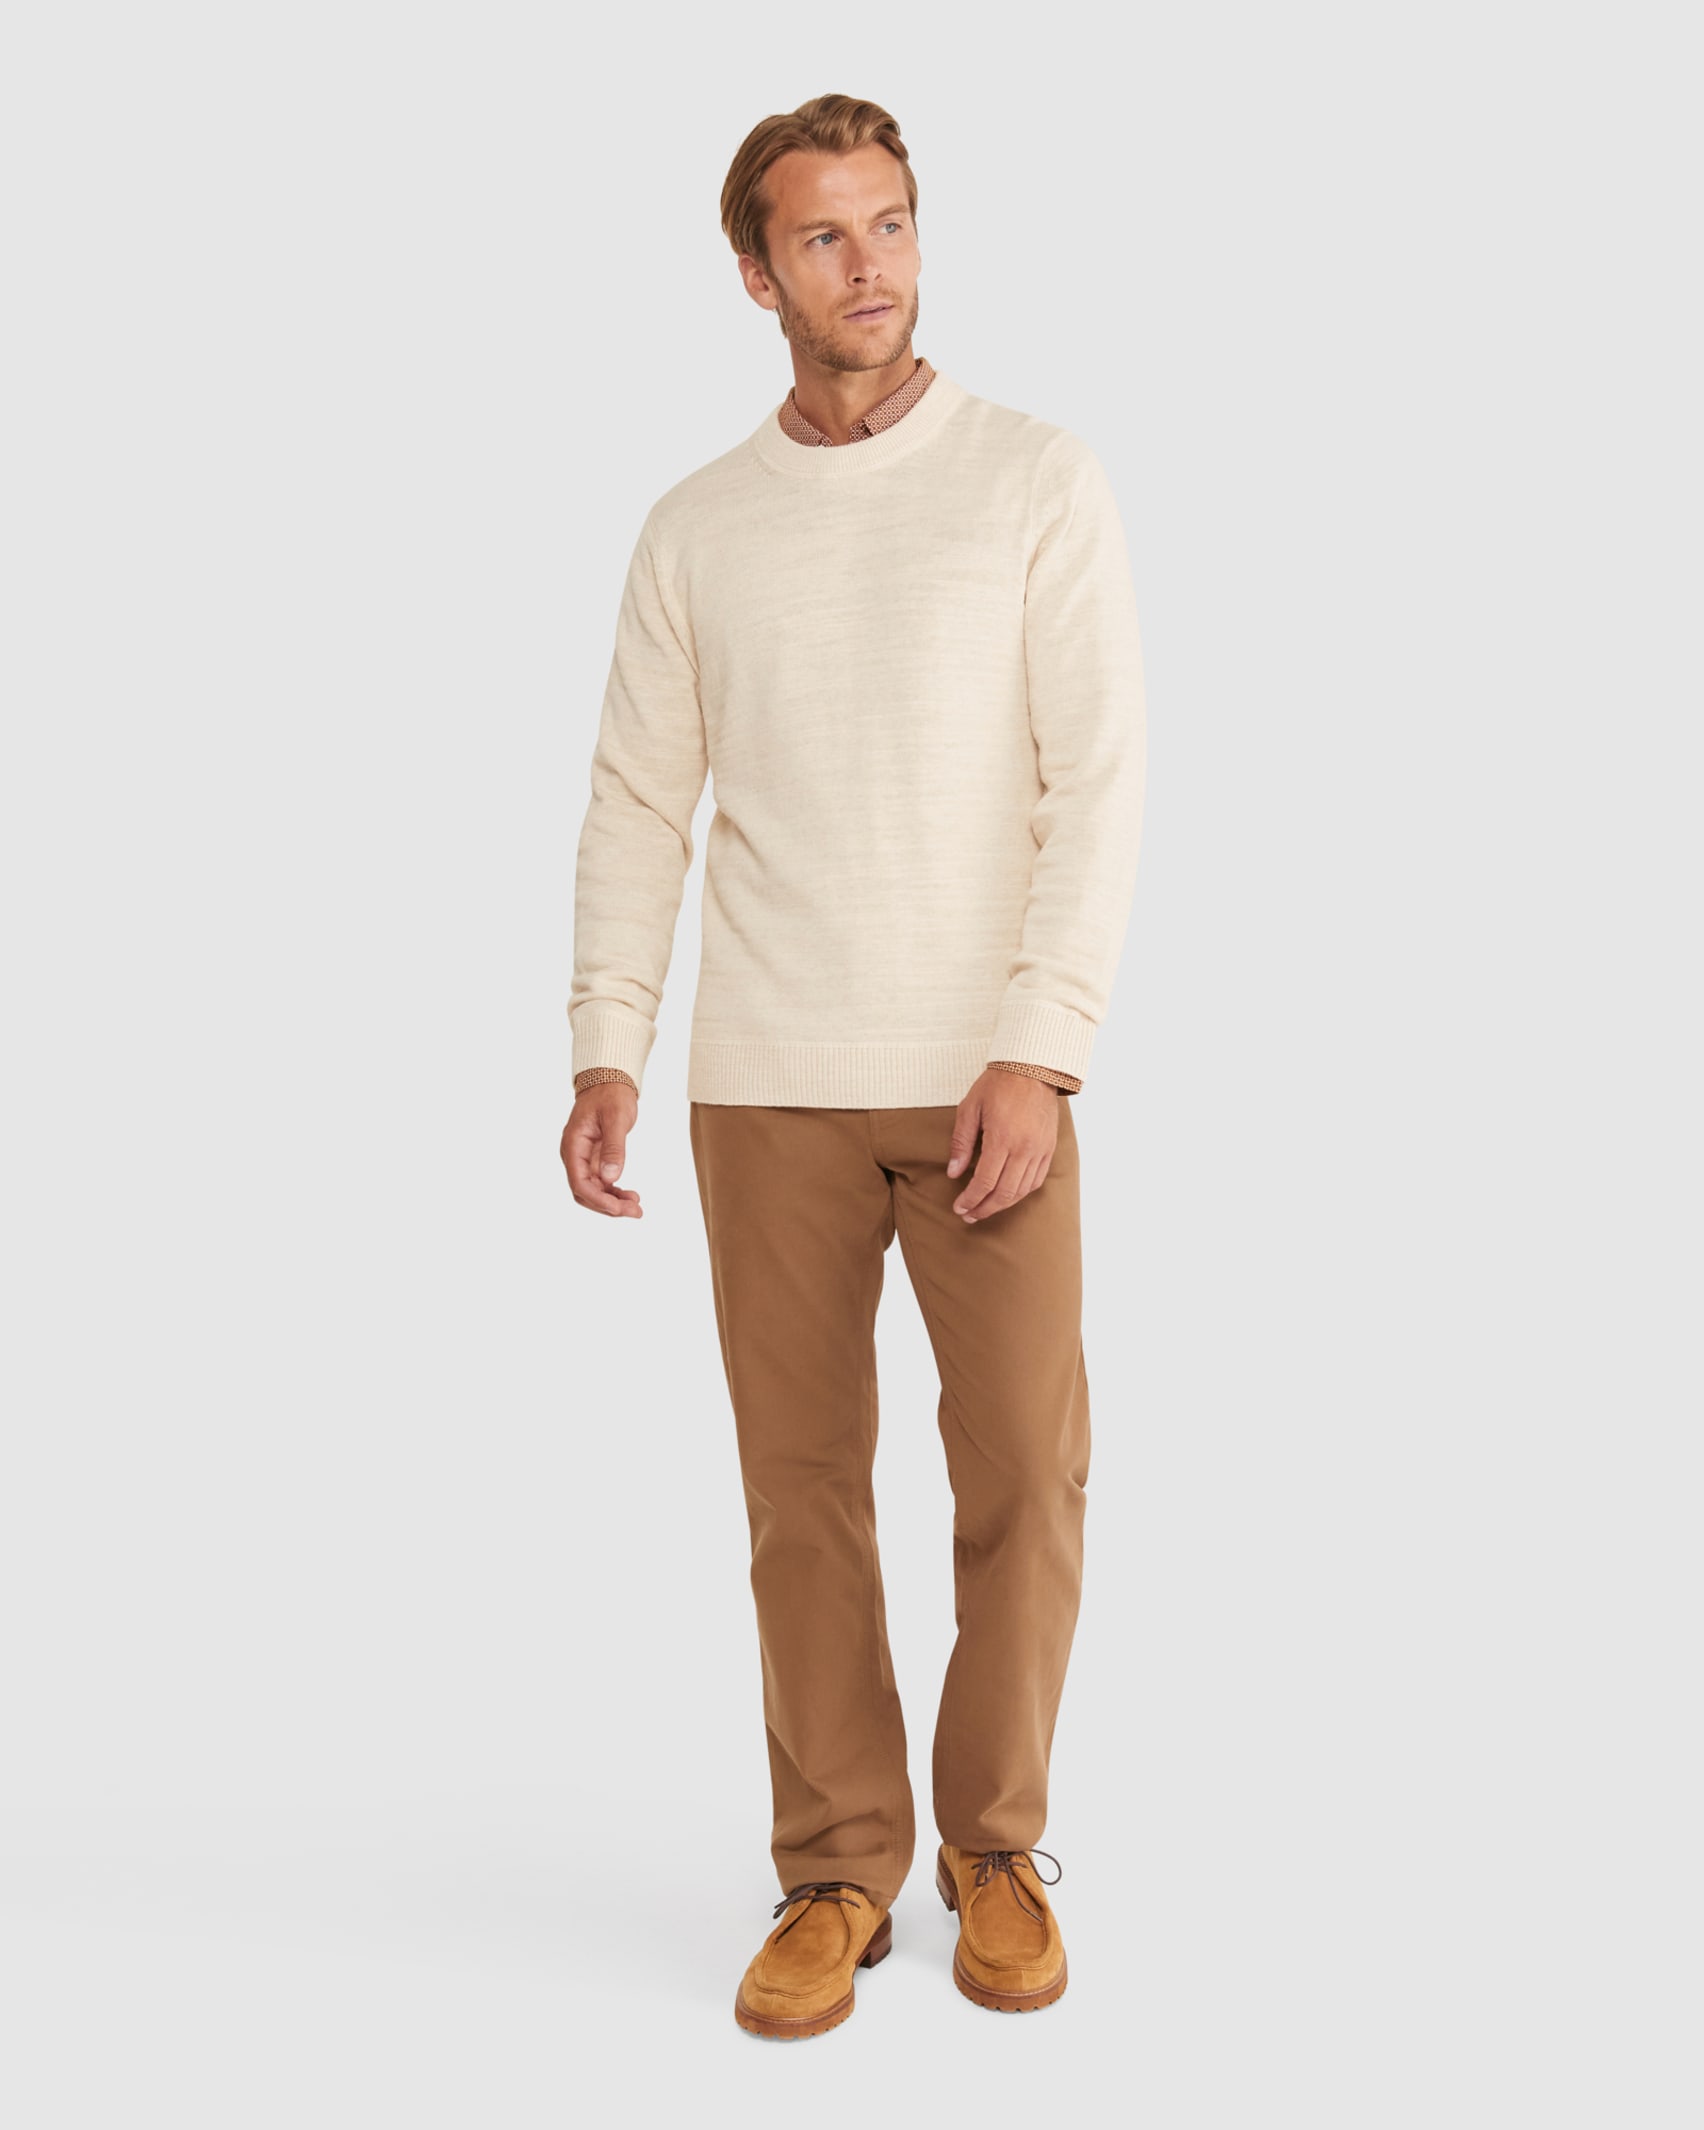 Oliver Crew Neck Knit in OFF WHITE